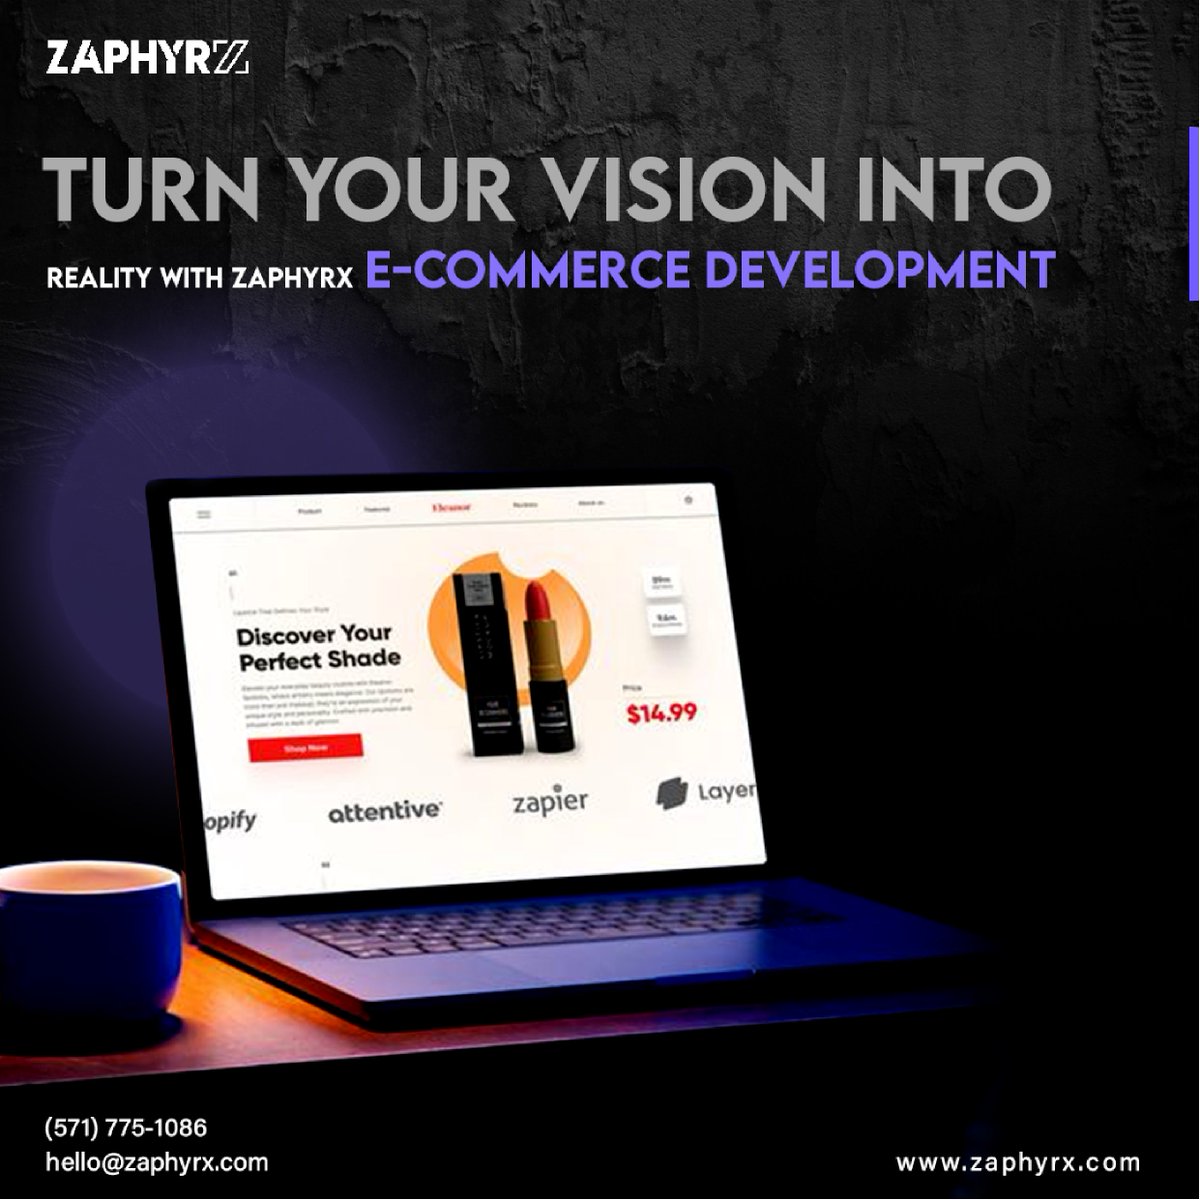 Ready to take your business online? 🚀 Let ZaphyrX handle the technicalities while you focus on growth

Call Us: +1 (571) 775 1086

#zaphyrx #AppDevelopment #graphicdesigning #ApplicationDevelopment #AppDeveloper #Innovation #Tech #Ecommerce #WebDevelopment #MarketingAgency